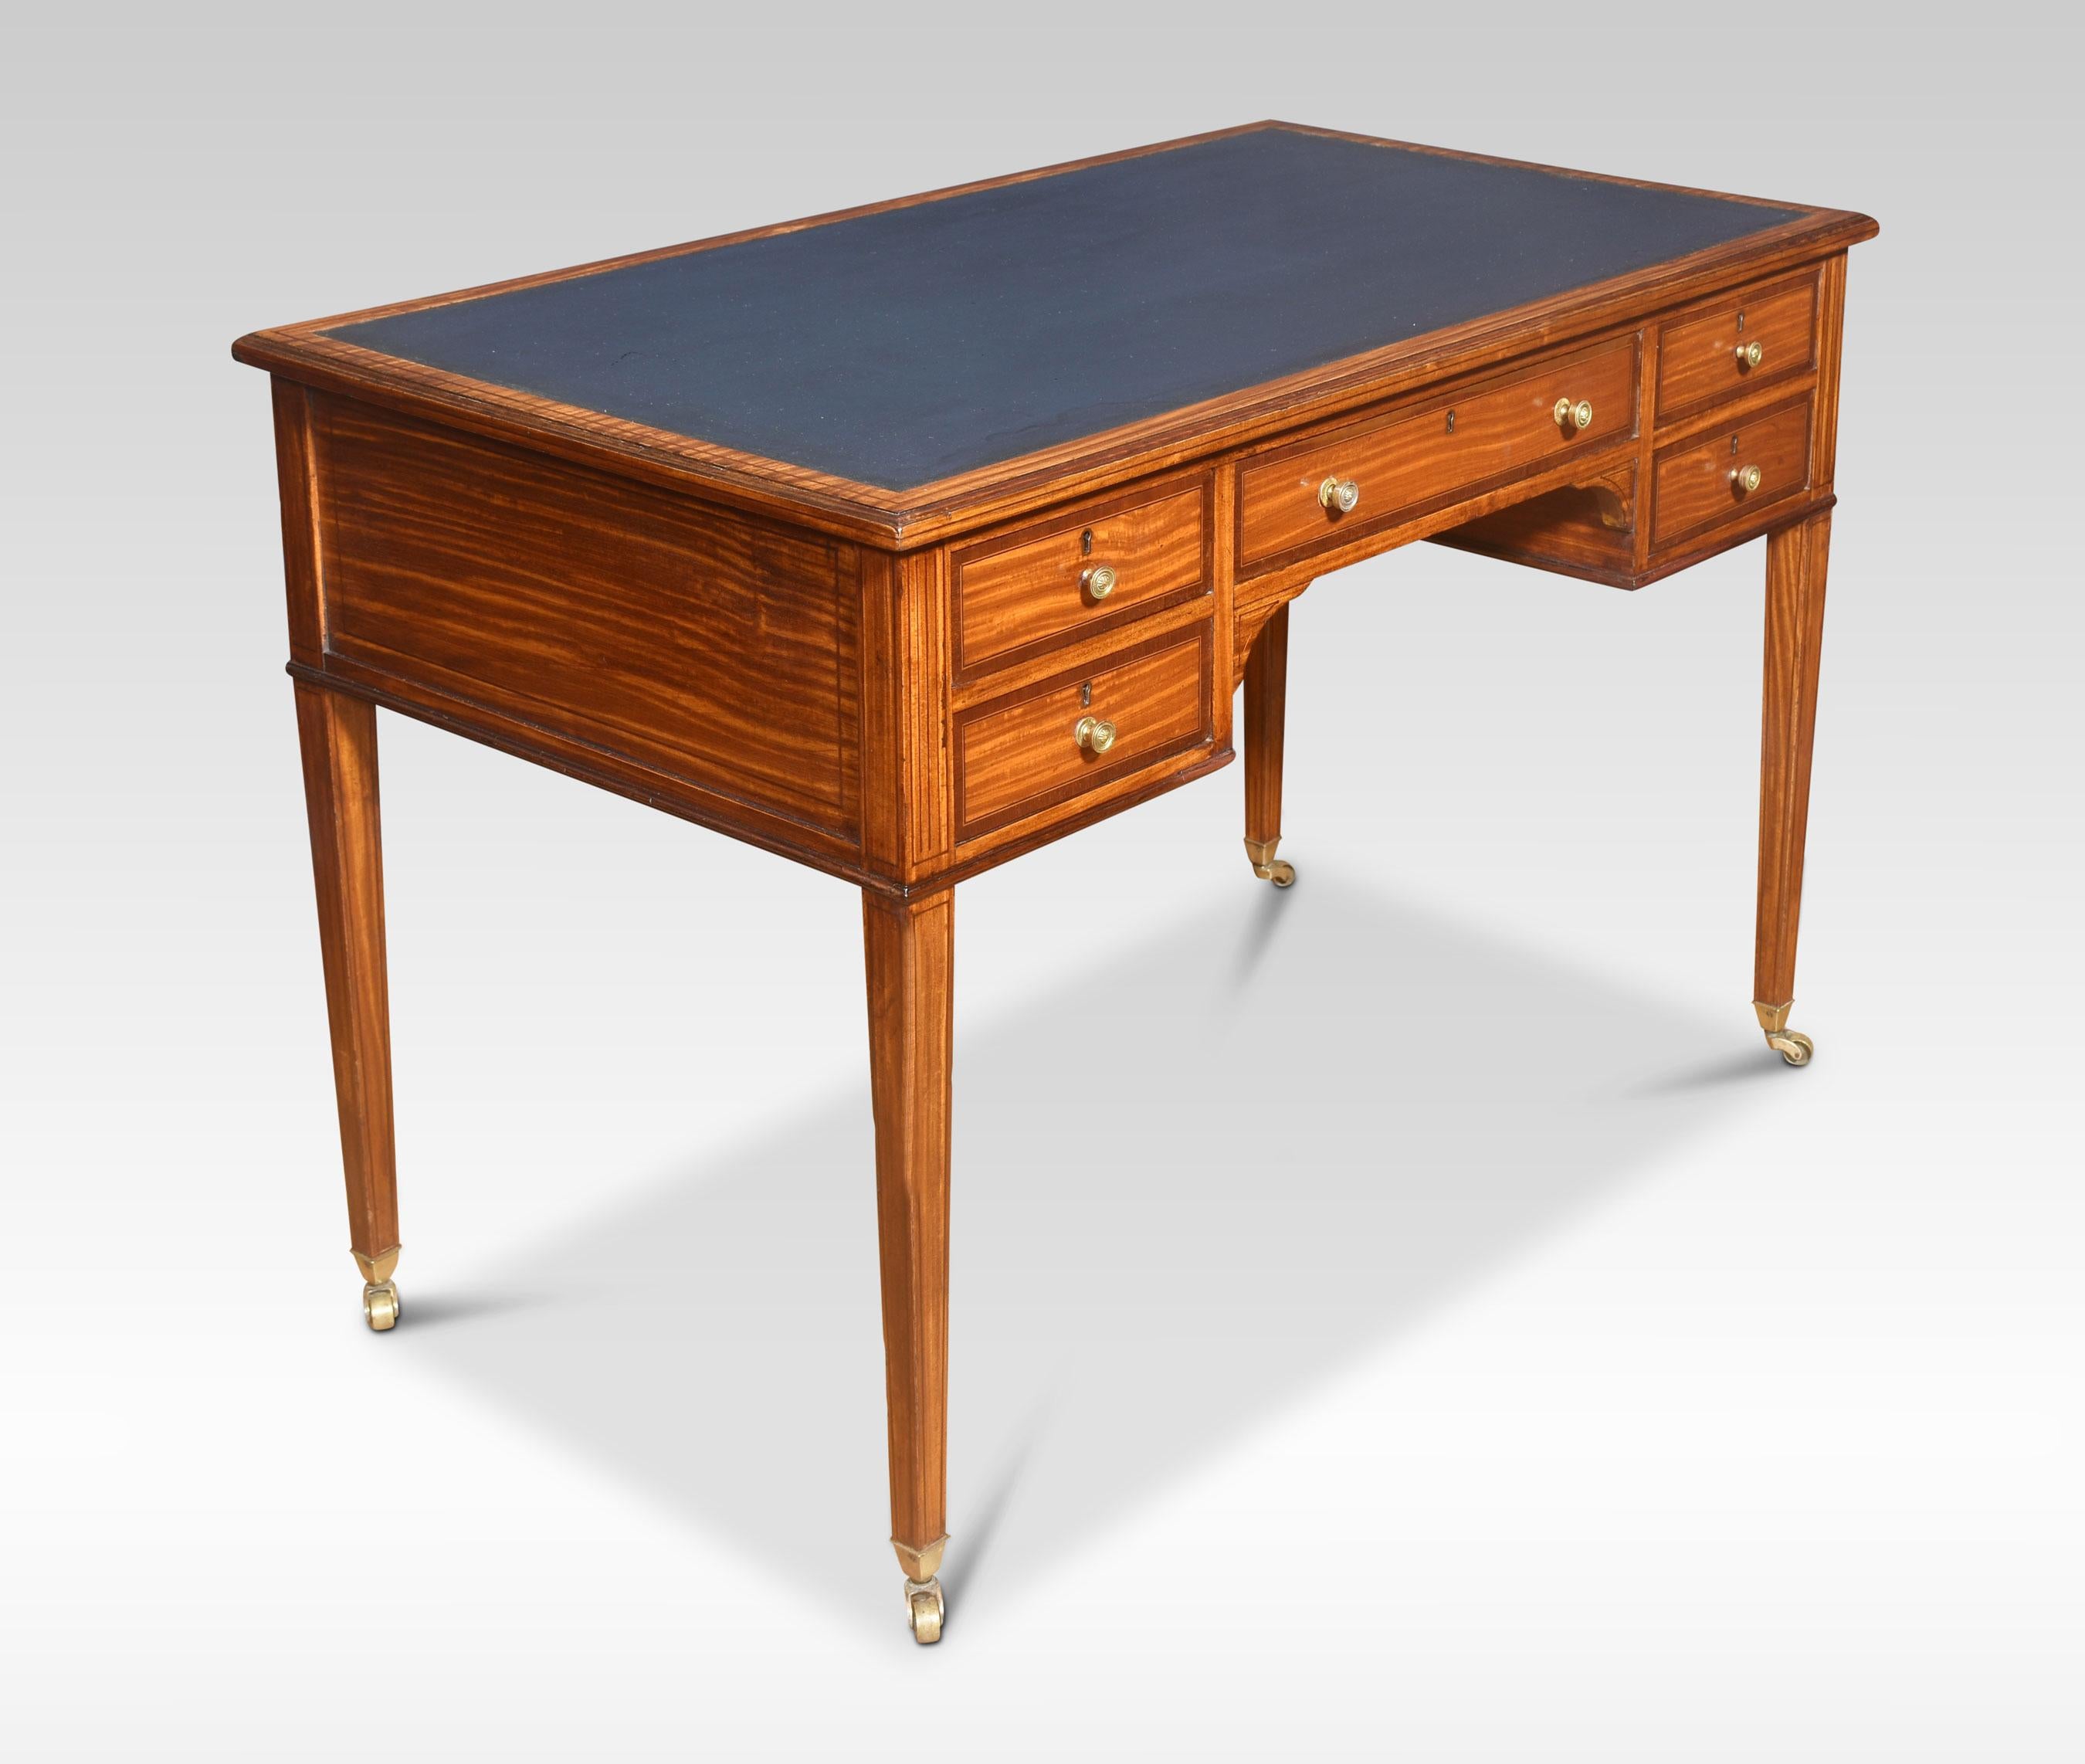 Satinwood writing table having a blue inset leather top enclosed by satinwood border. Above and arrangement of drawers with brass knob handles. All are raised up on four square supports terminating in brass casters.
Dimensions
Height 29 Inches
Width